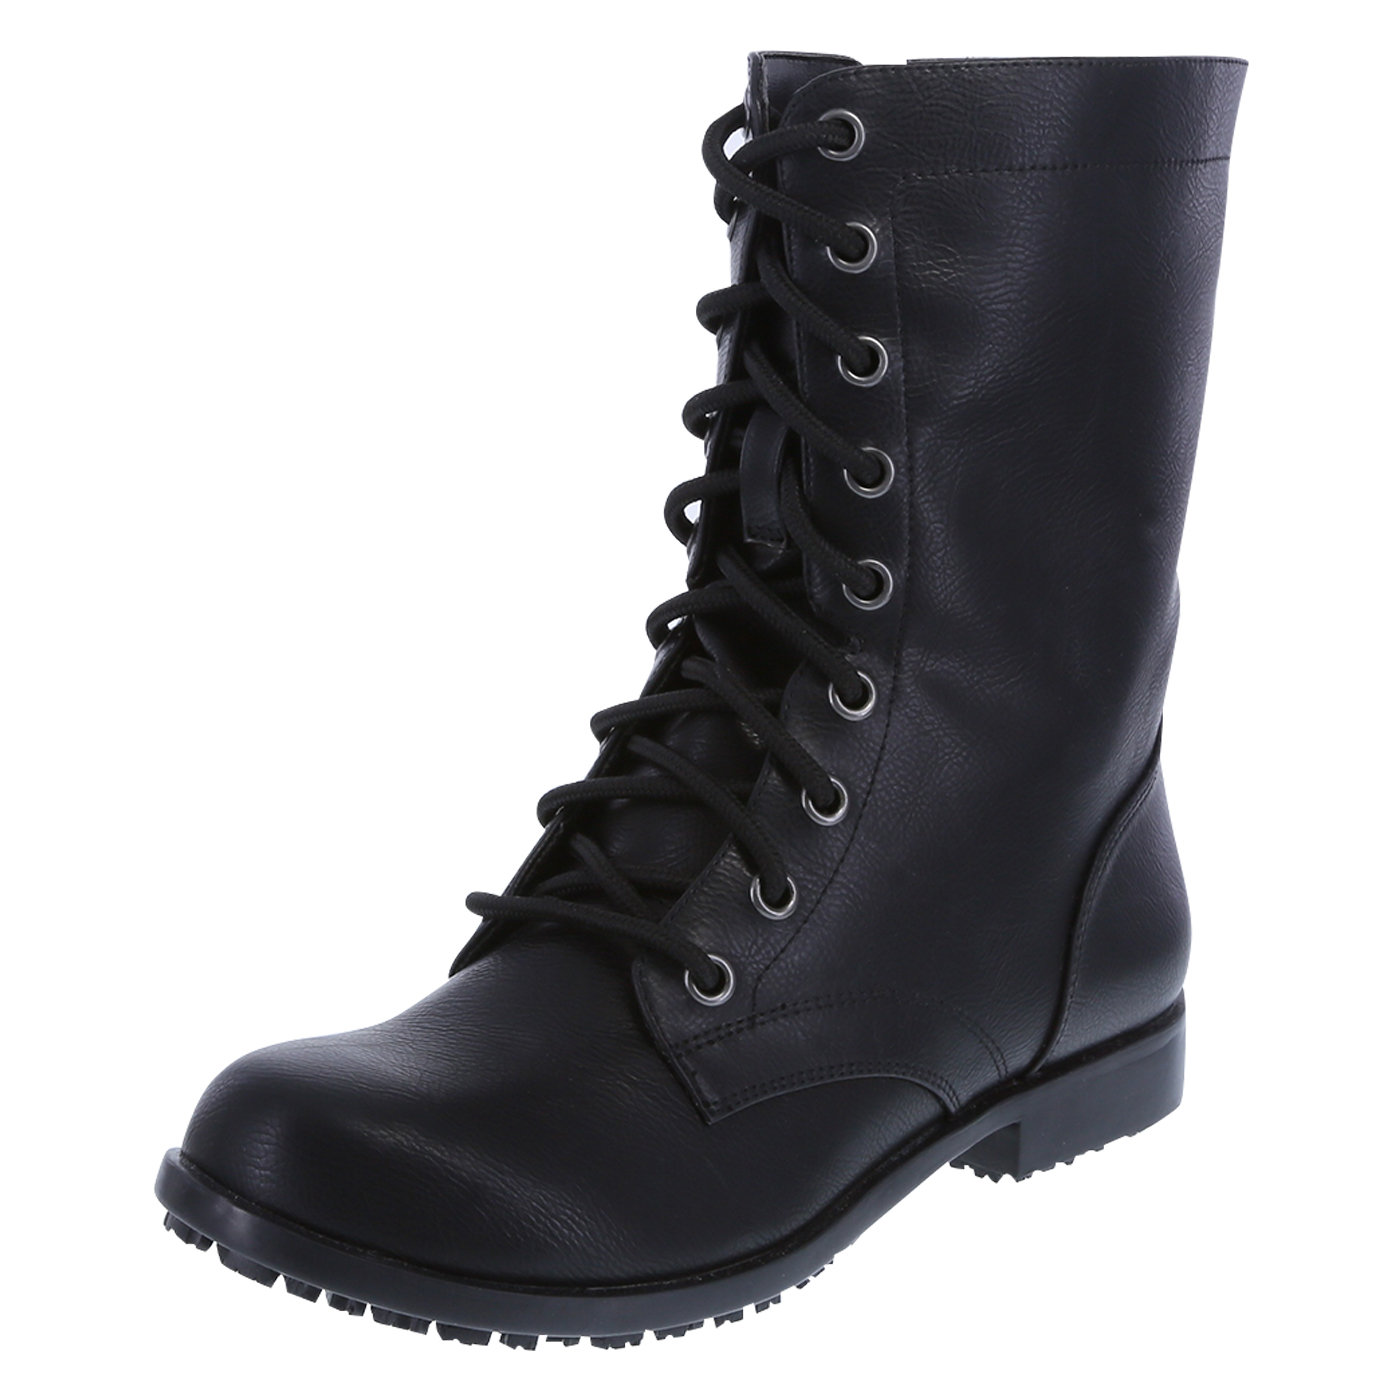 black boots for women womenu0026apos;s slip resistant brooke lace-up with zipper boots, black, hi pckjpxb